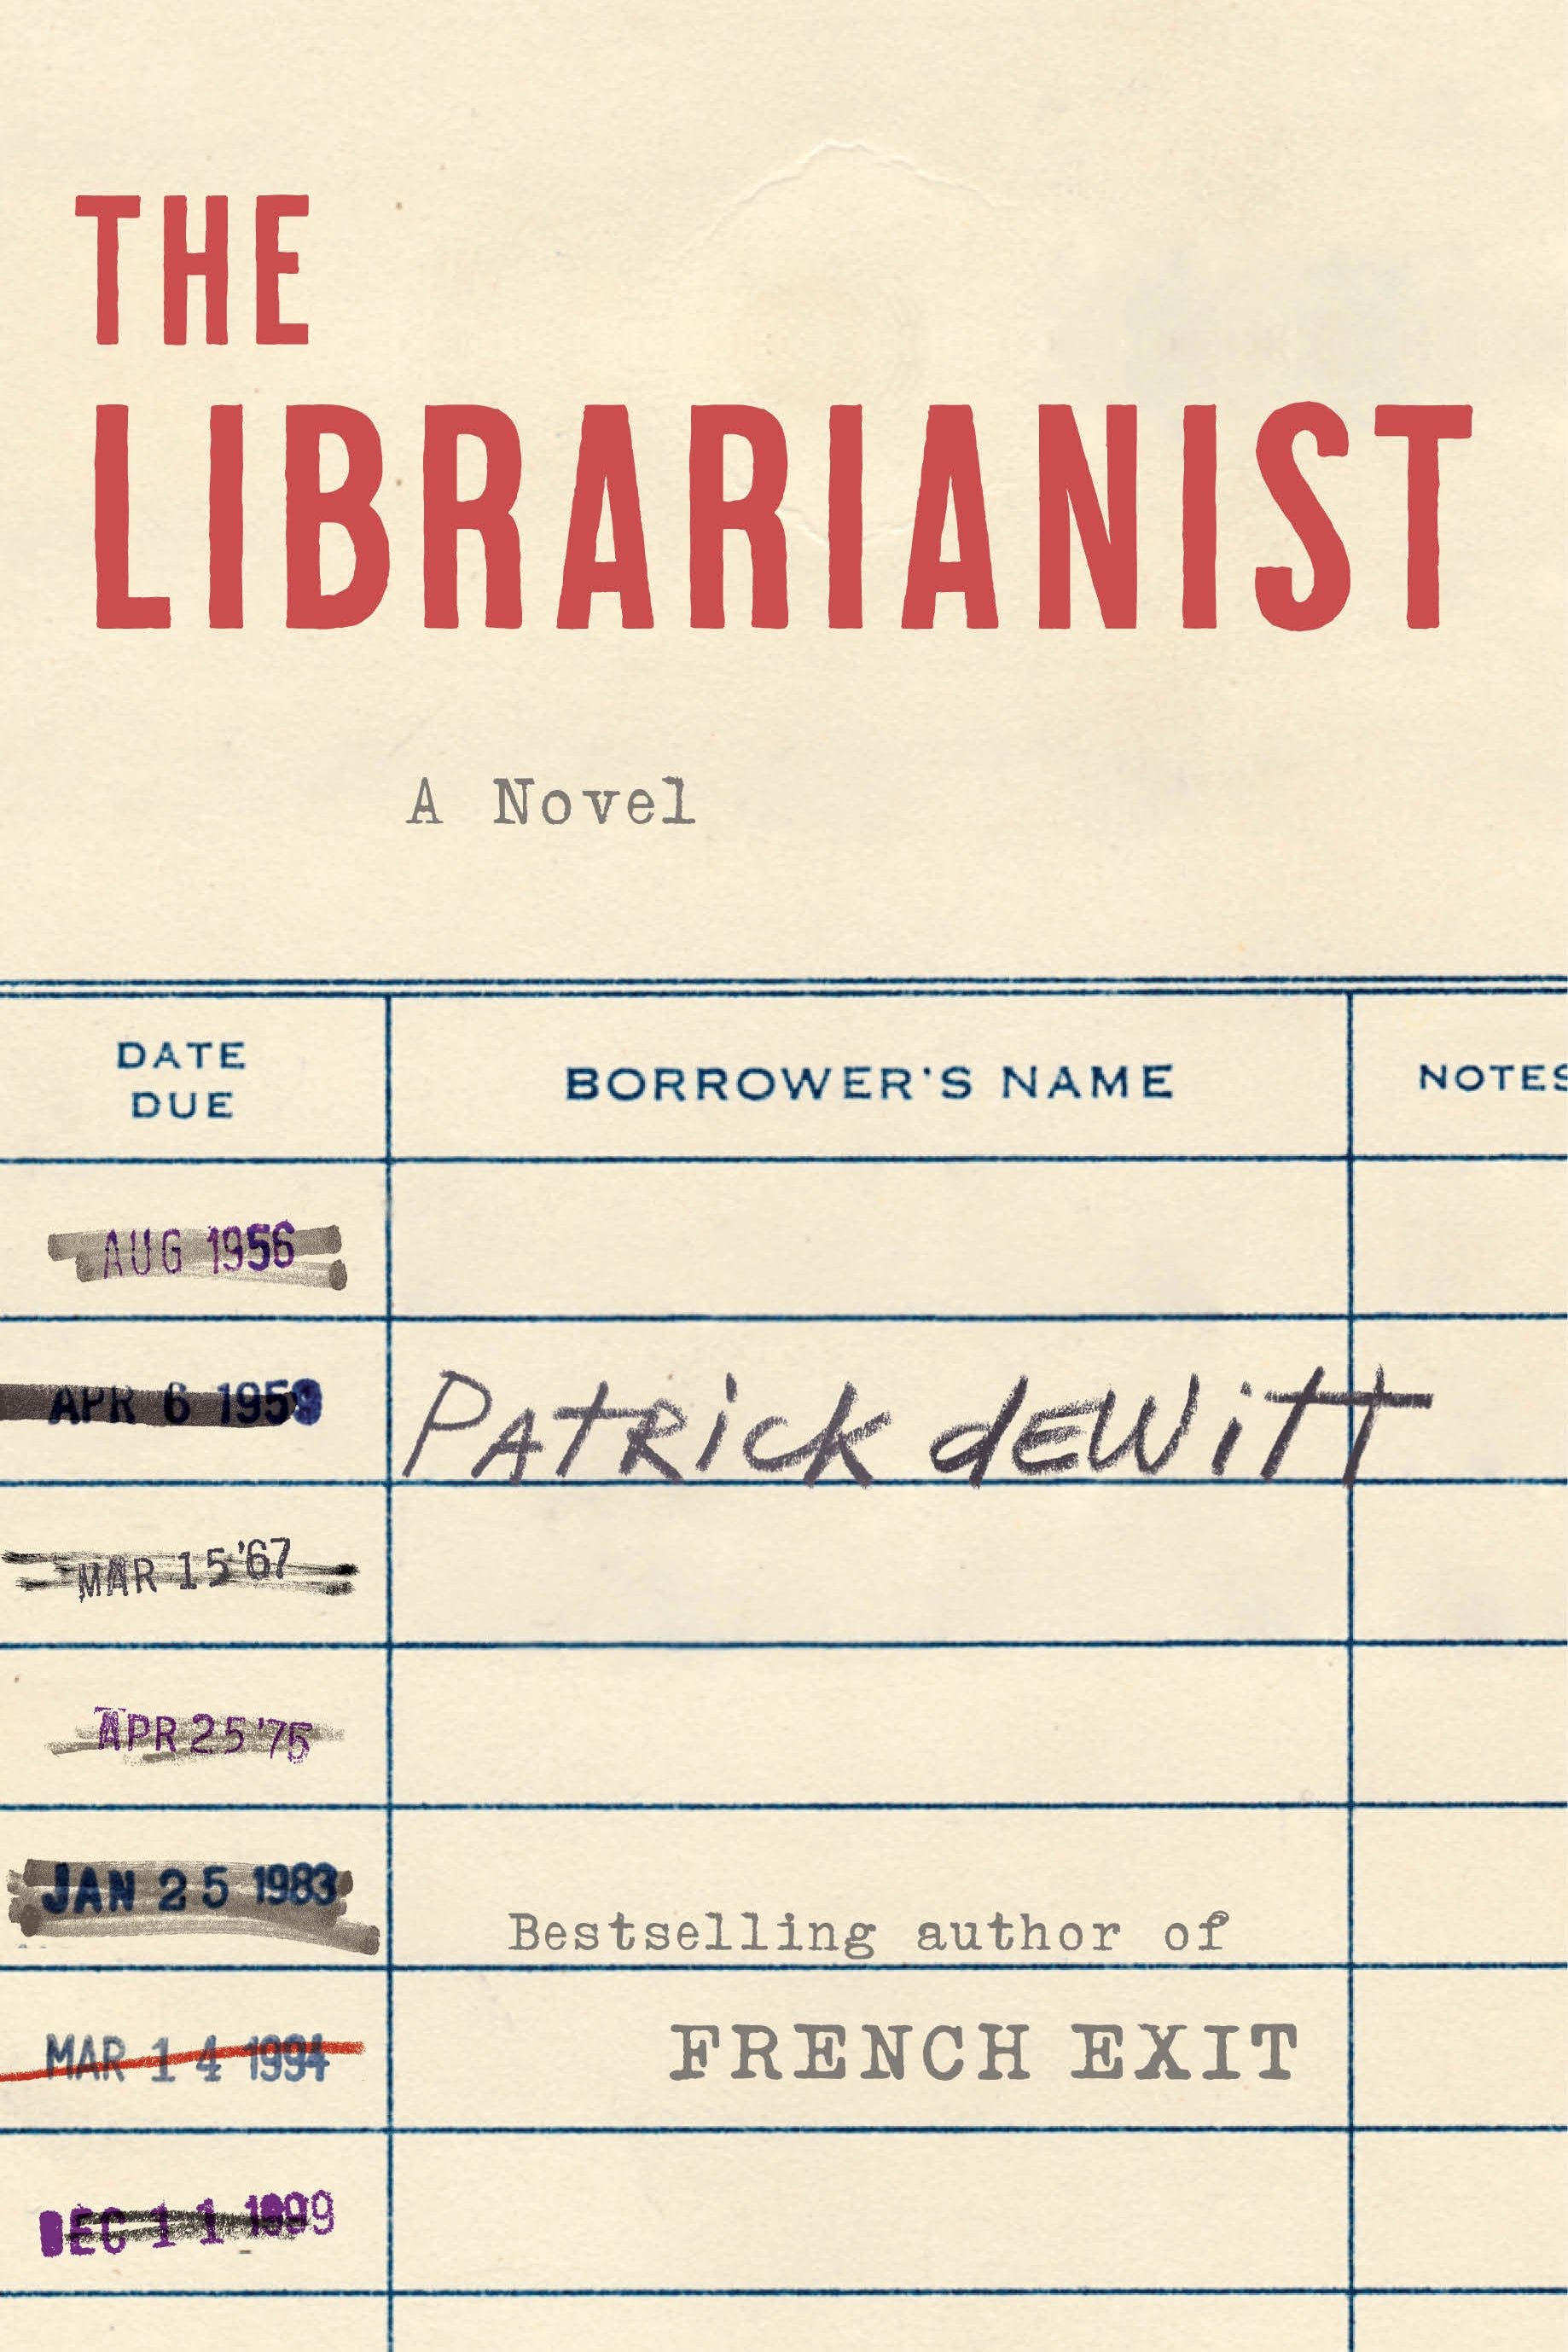 Book jacket for The Librarianist.